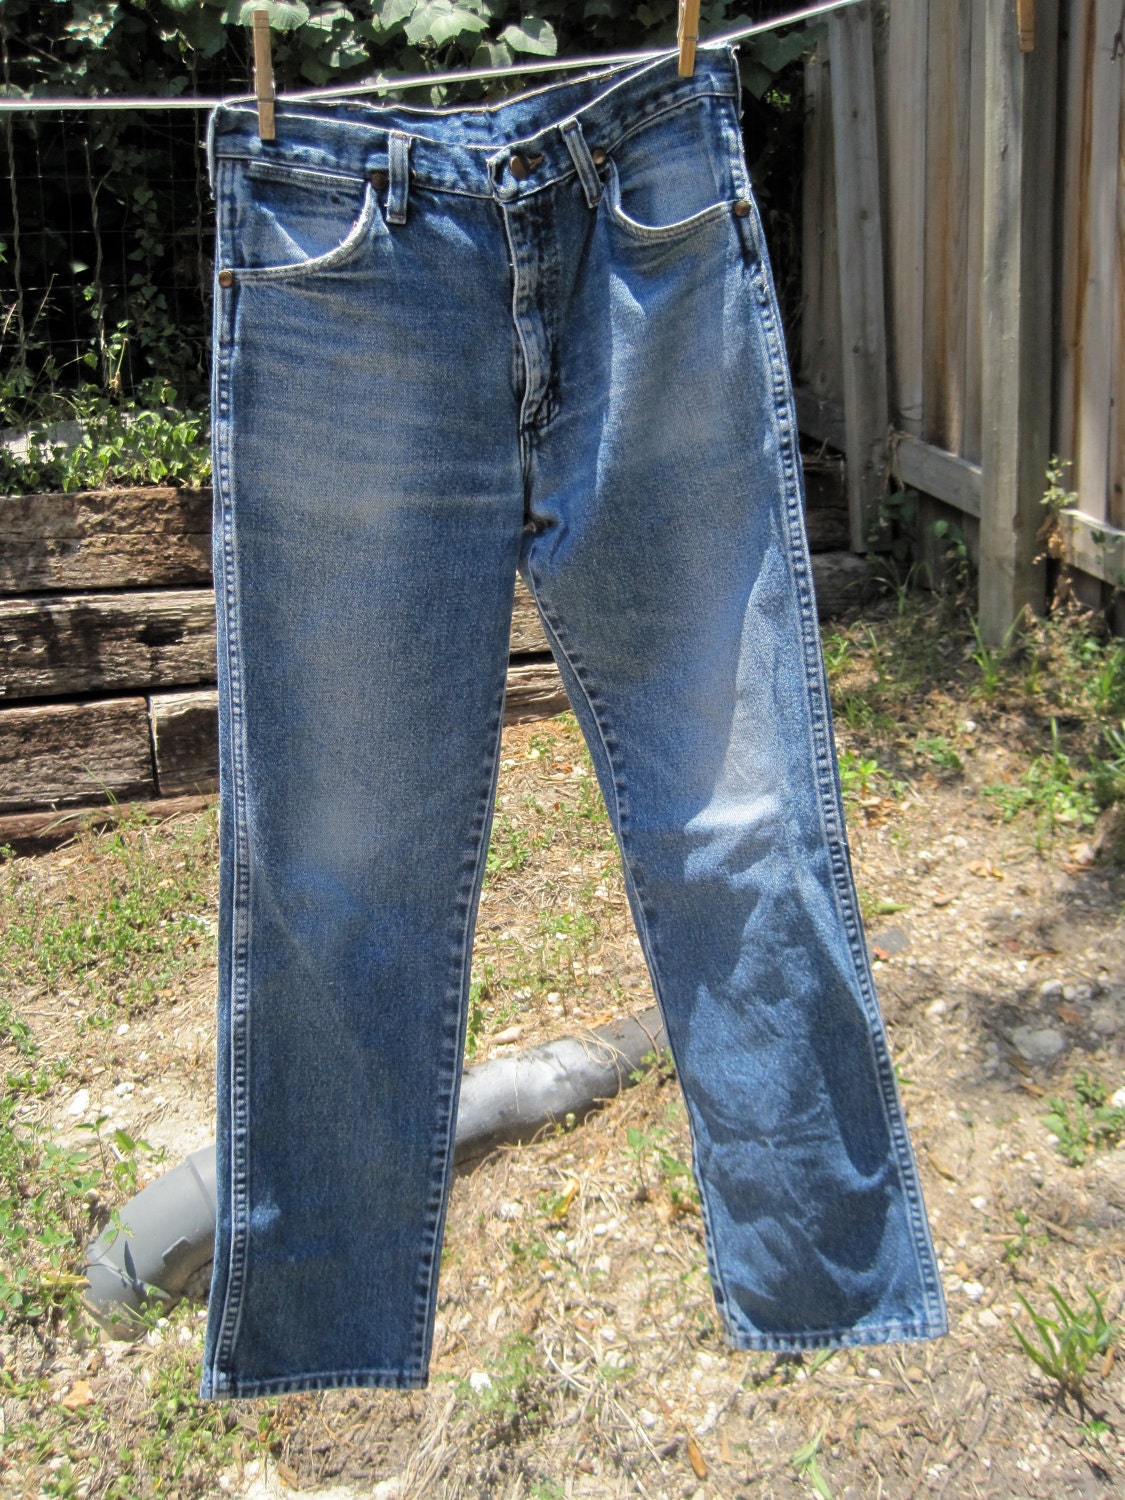 Perfectly Worn in Vintage Wrangler Jeans by EKYvintage on Etsy